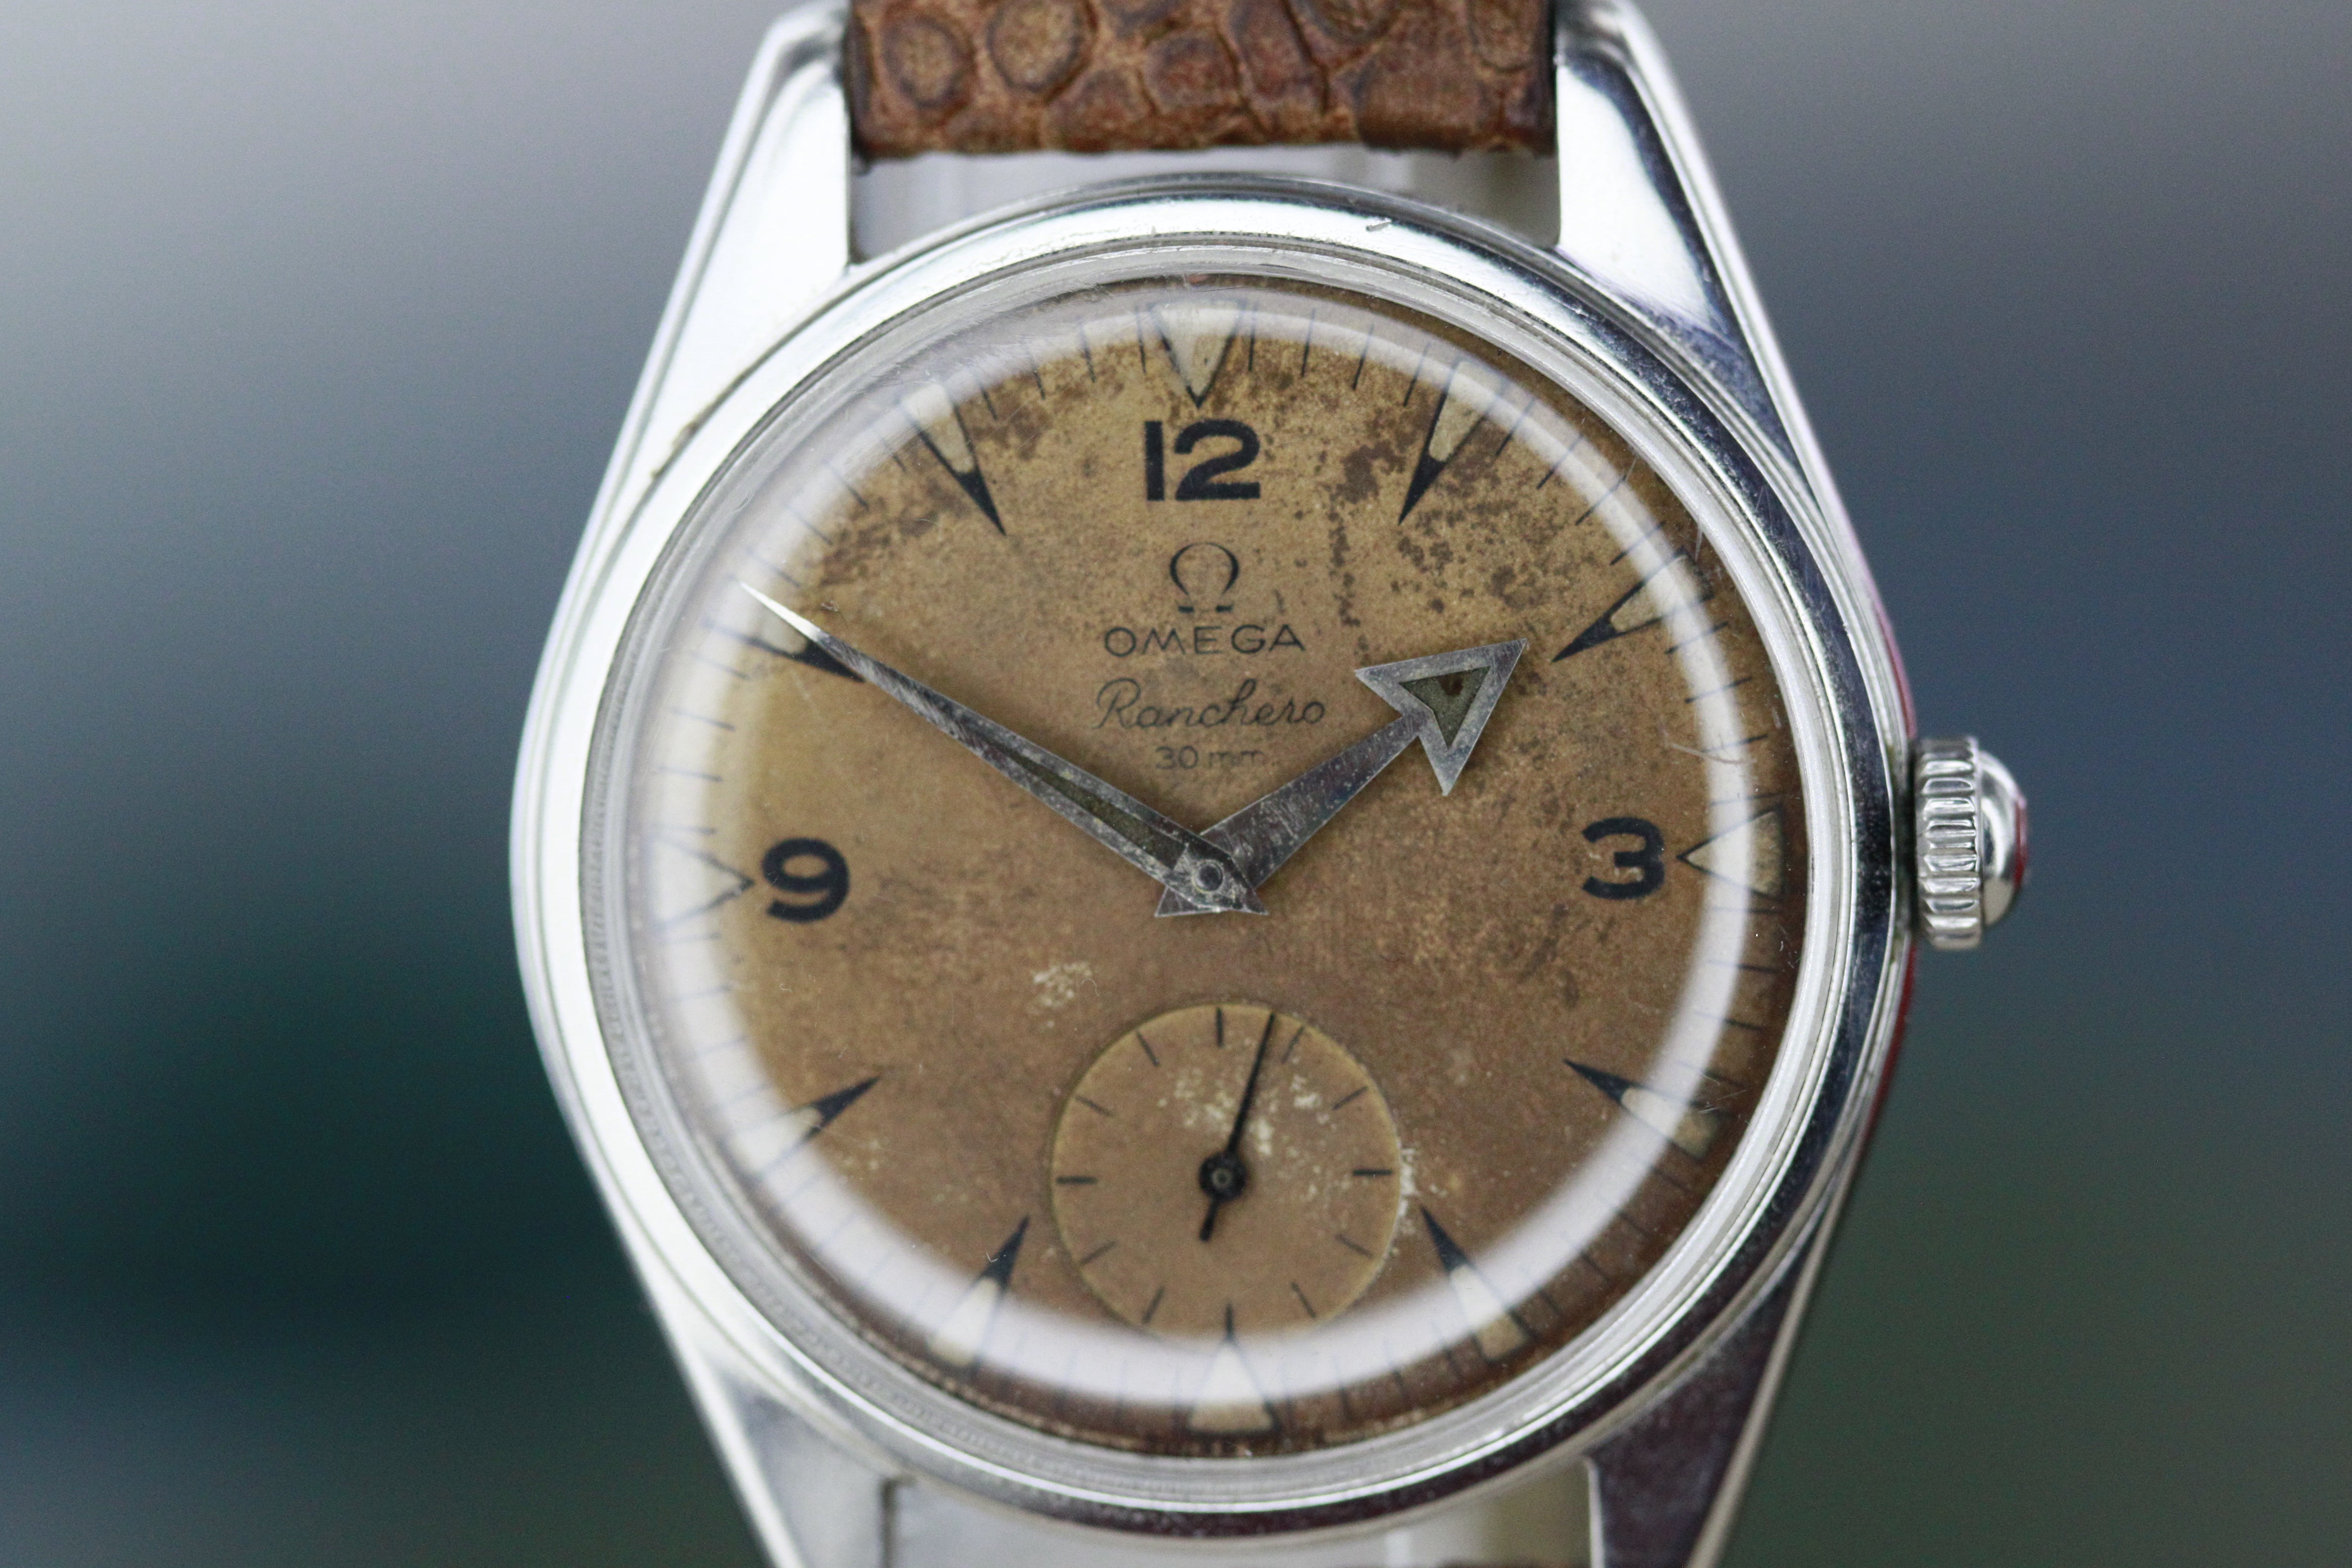 Omega Ranchero Tropical Dial Ref.2990 Tropical Radium Dial delivered to the Peruvian Airforce